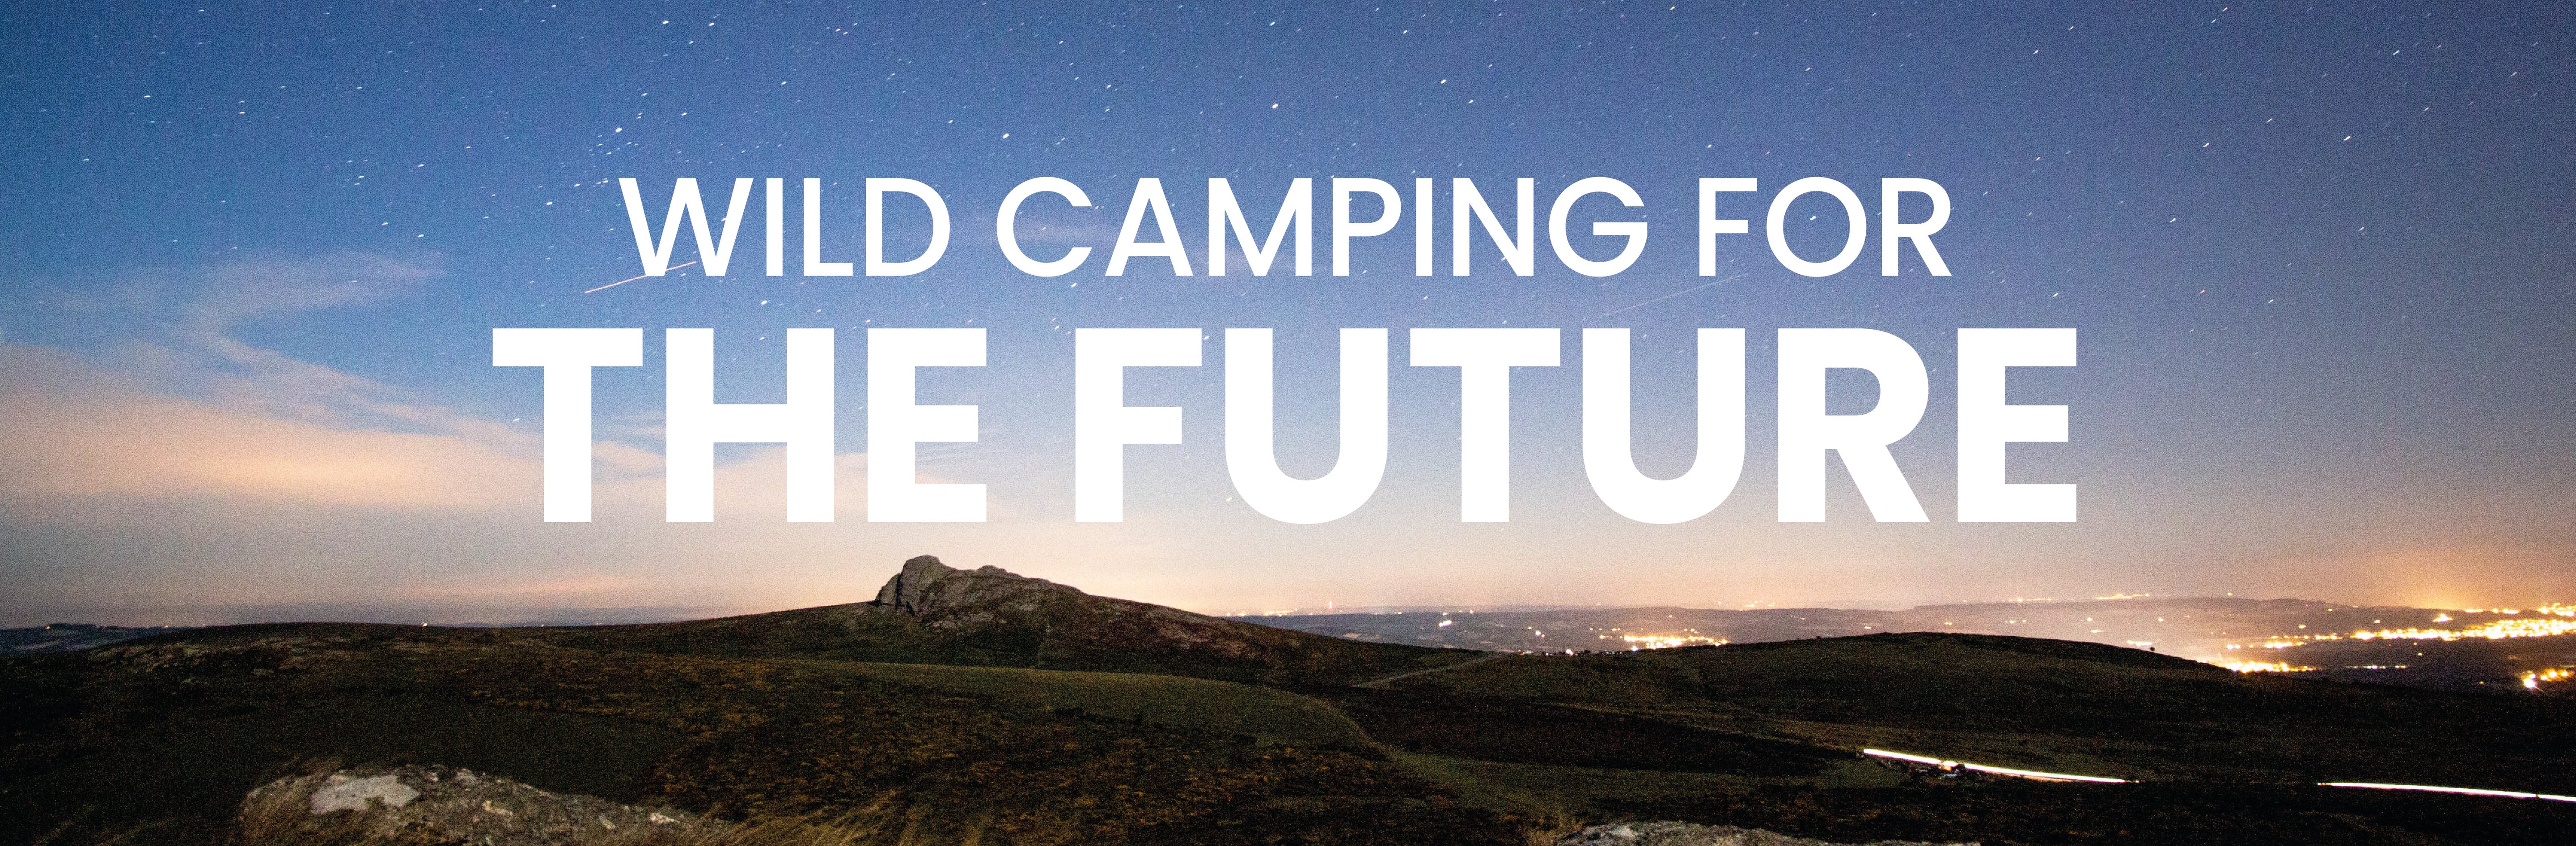 Wild Camping for the future - How to take action - dewerstone